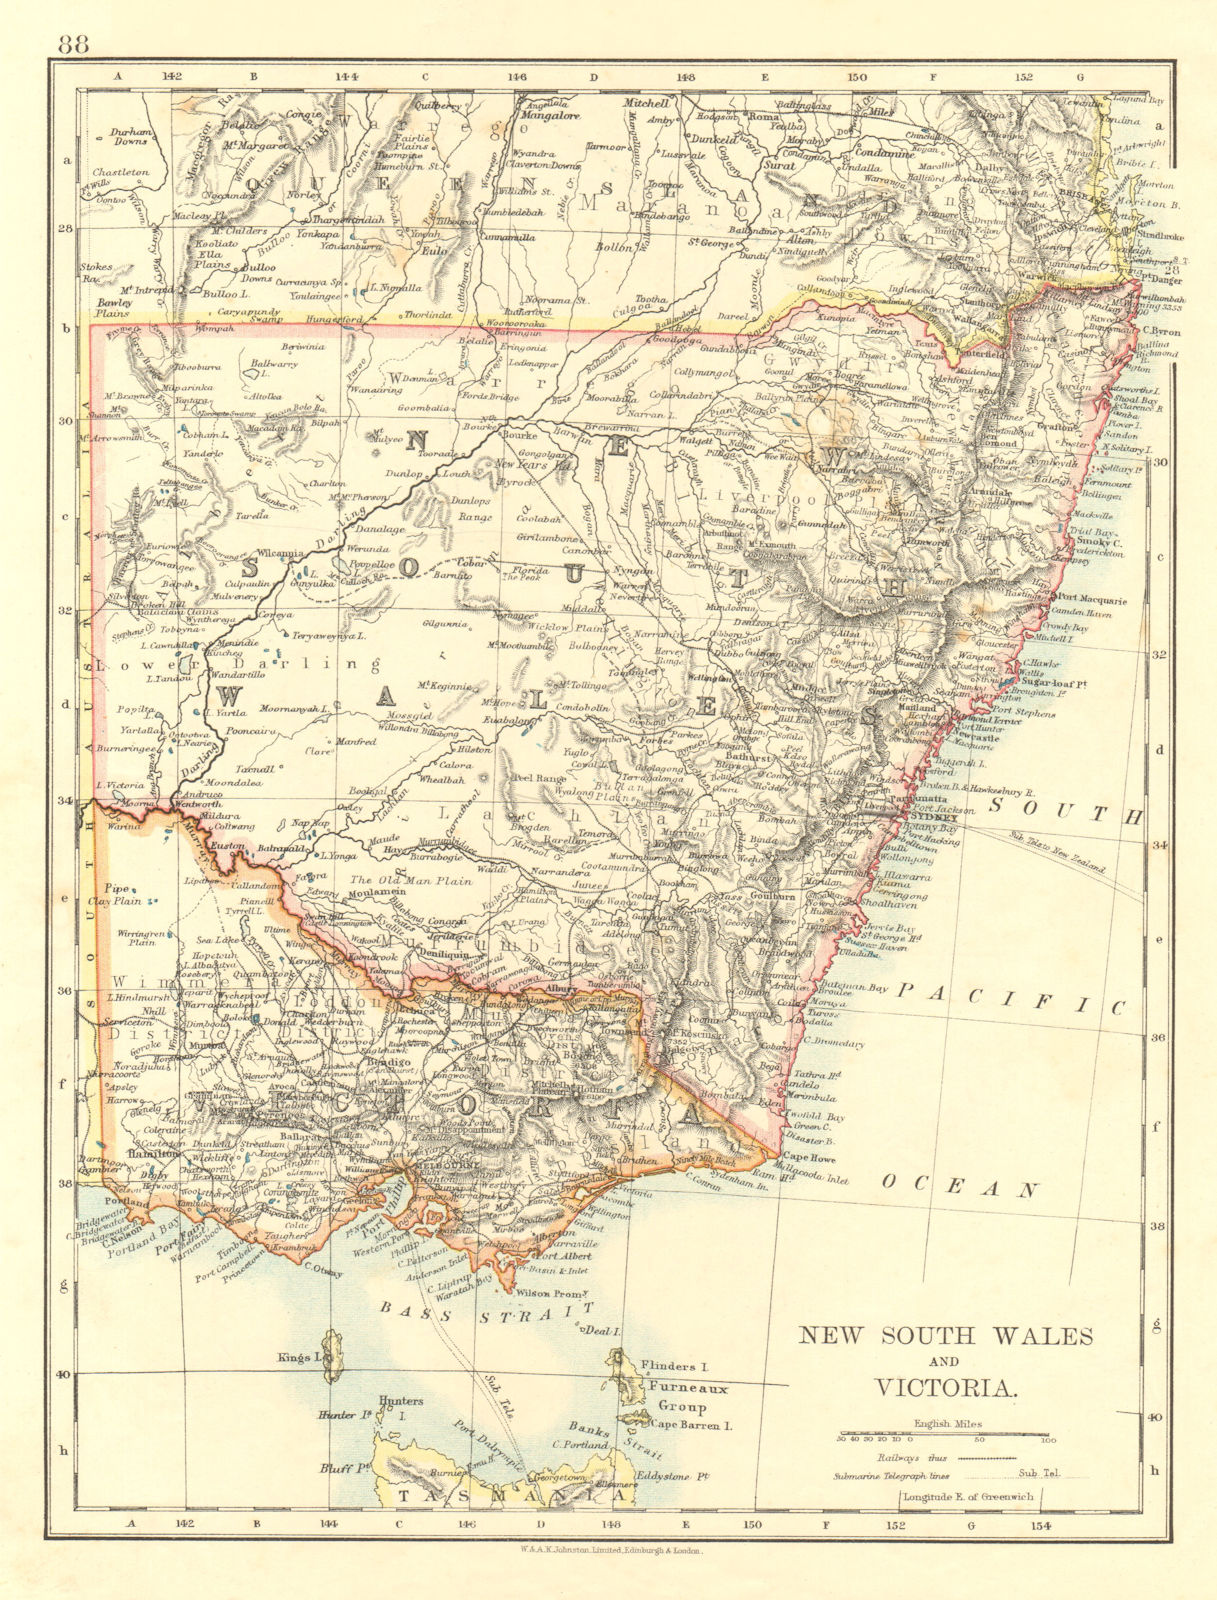 NEW SOUTH WALES & VICTORIA showing railways telegraph cables. Australia 1906 map